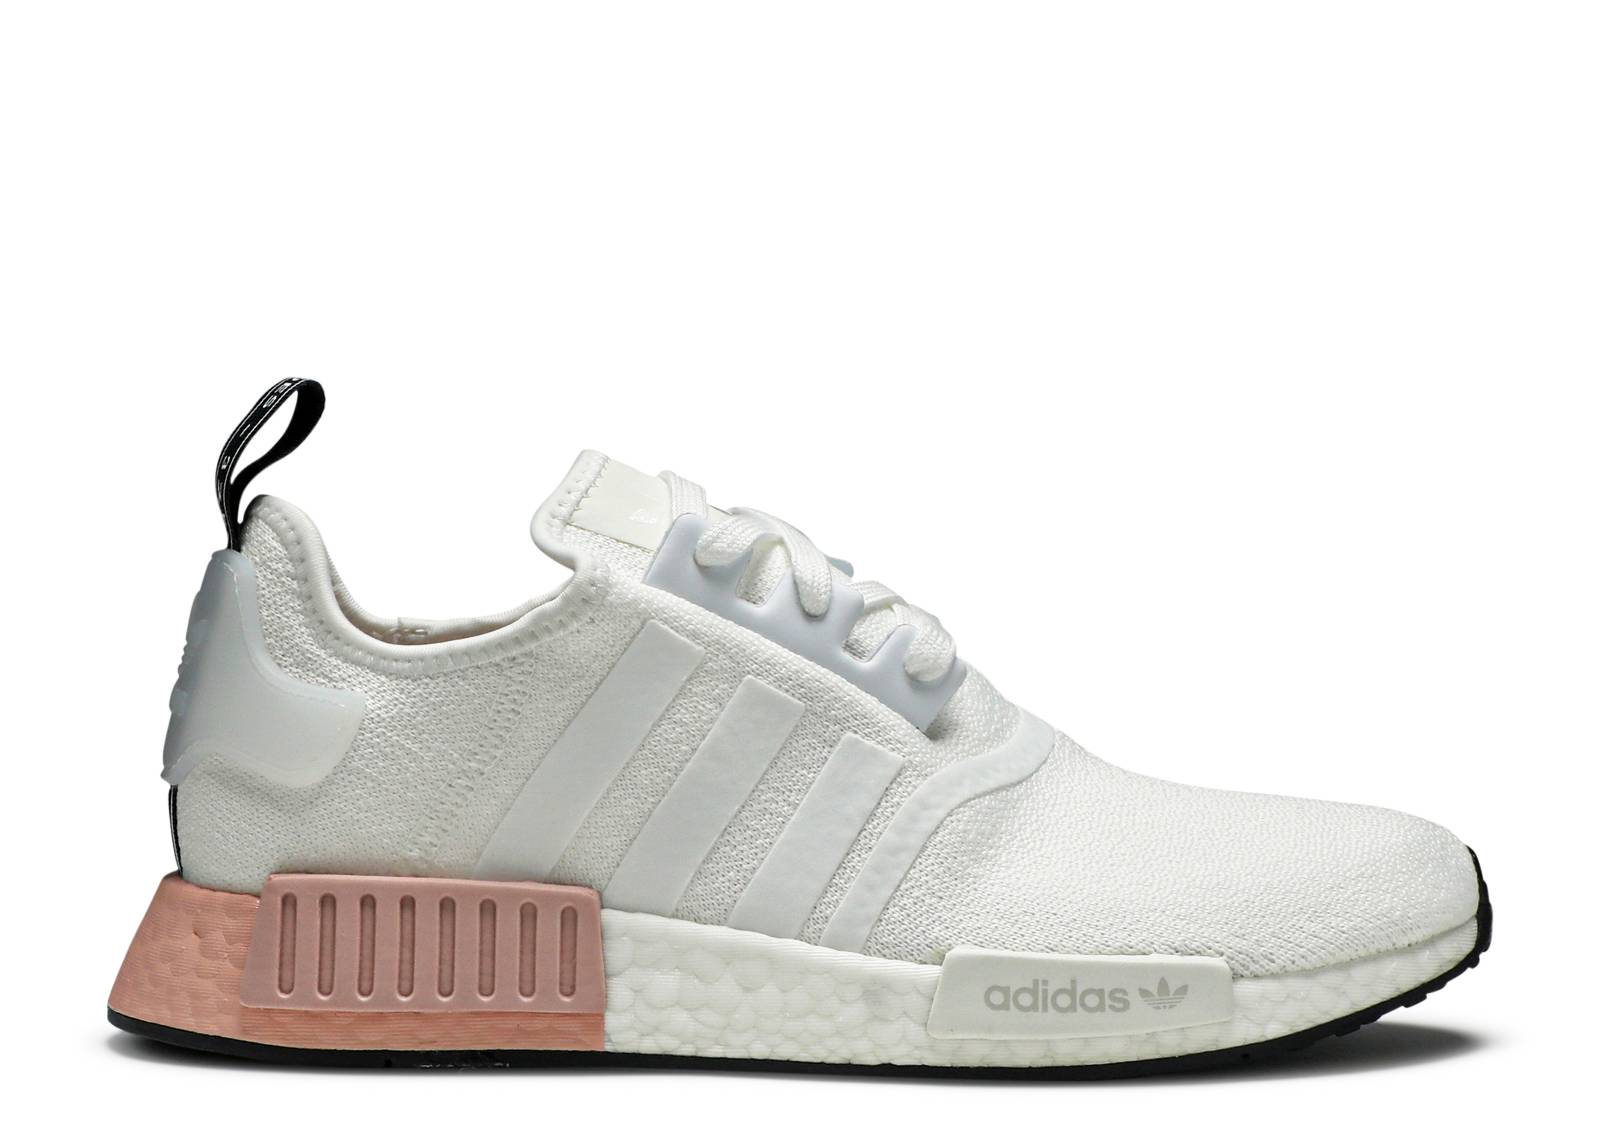 NMD_R1 'Vapour Pink'